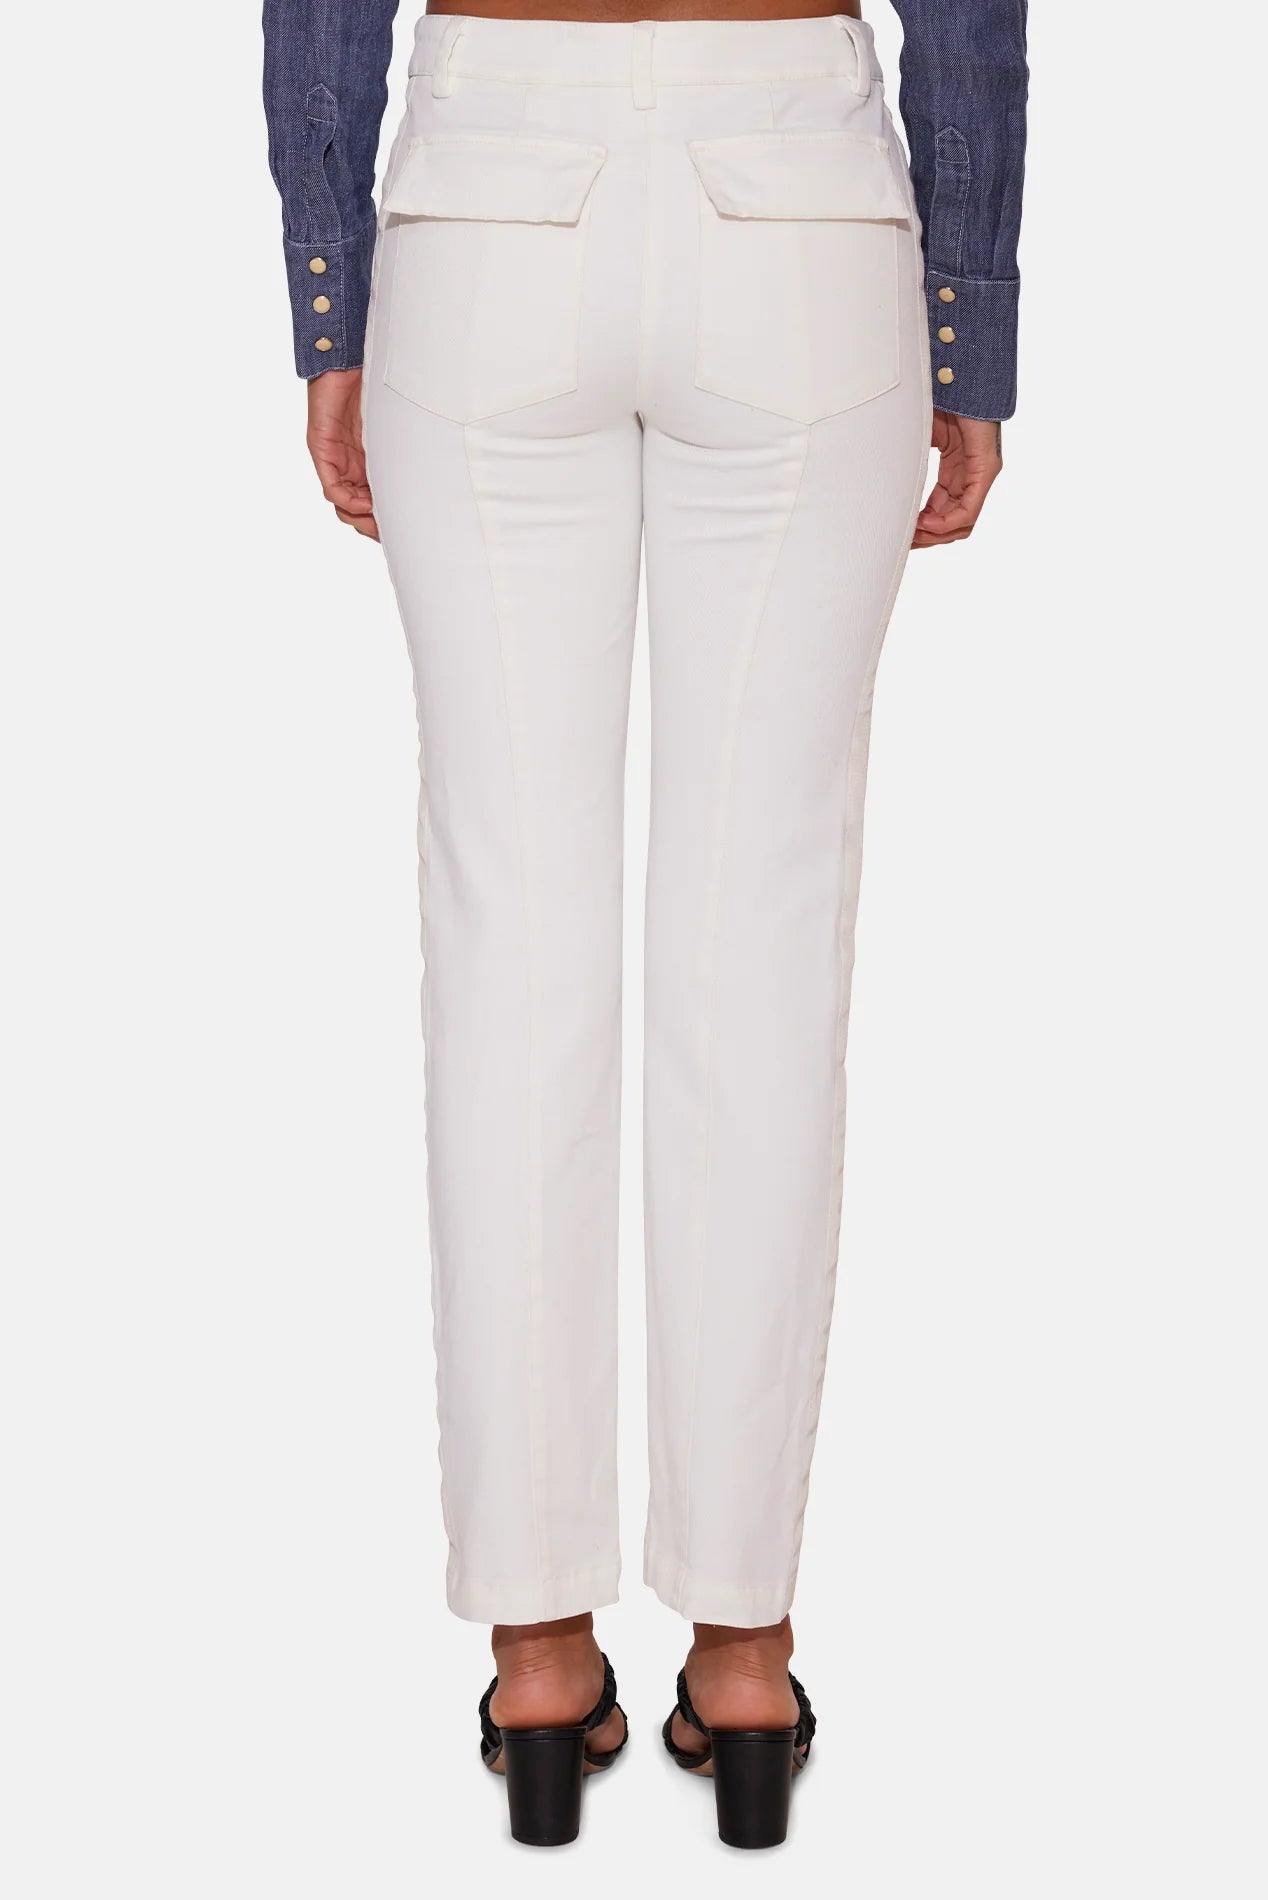 TWP Ivory Cotton Trousers